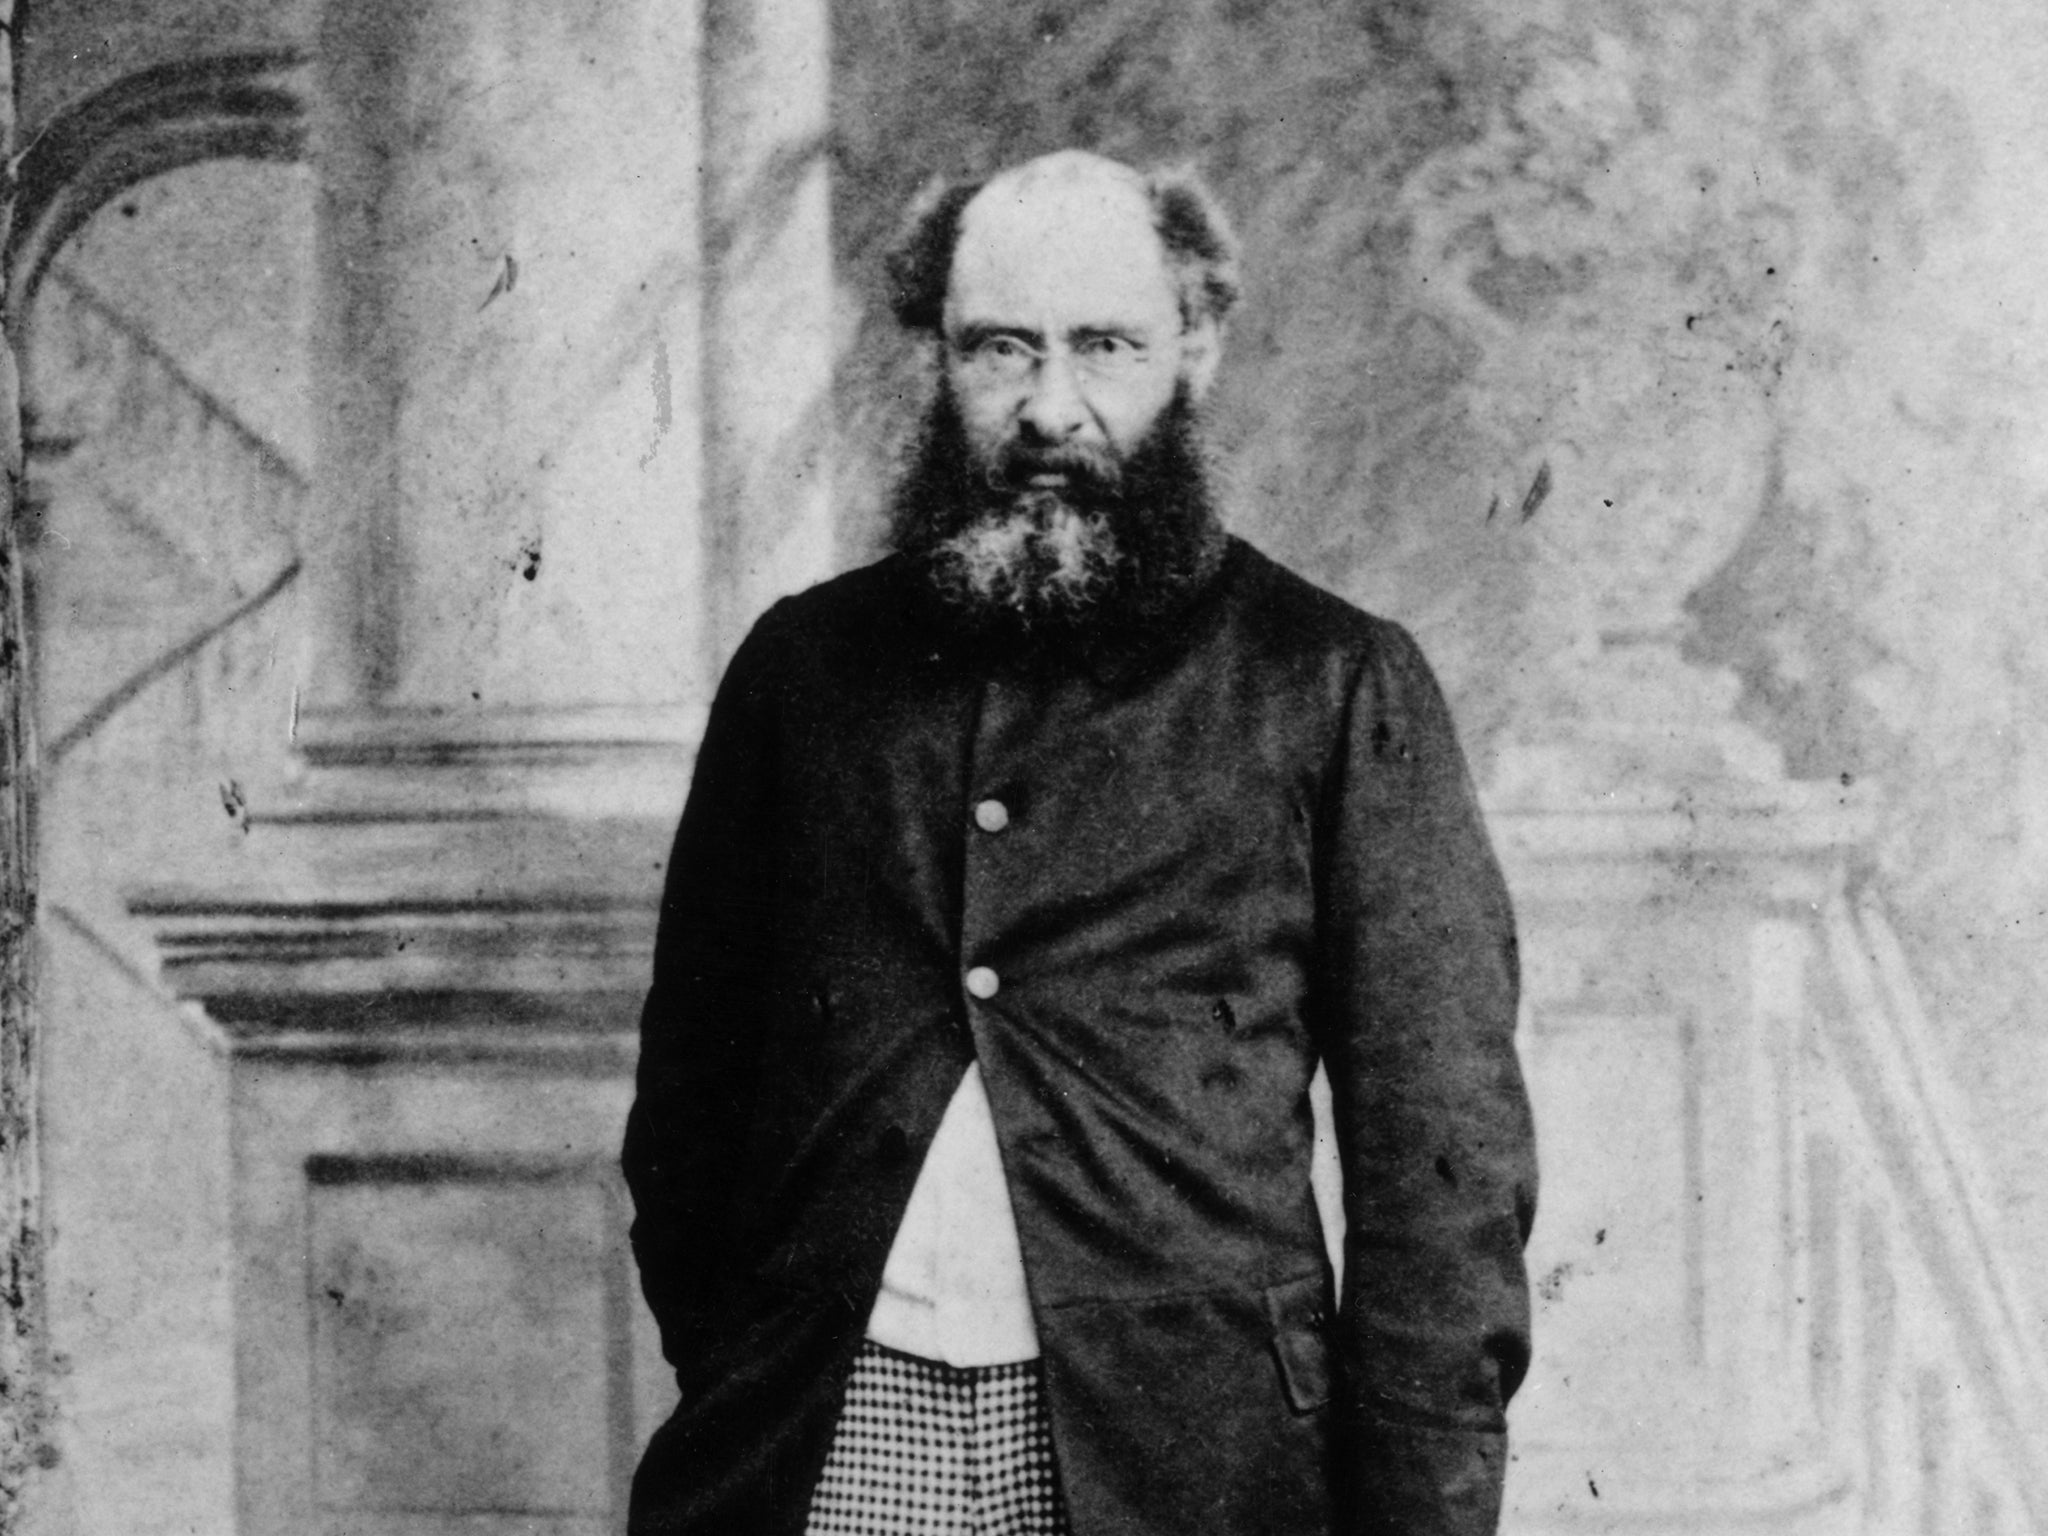 Anthony Trollope was born on 24 April 1815